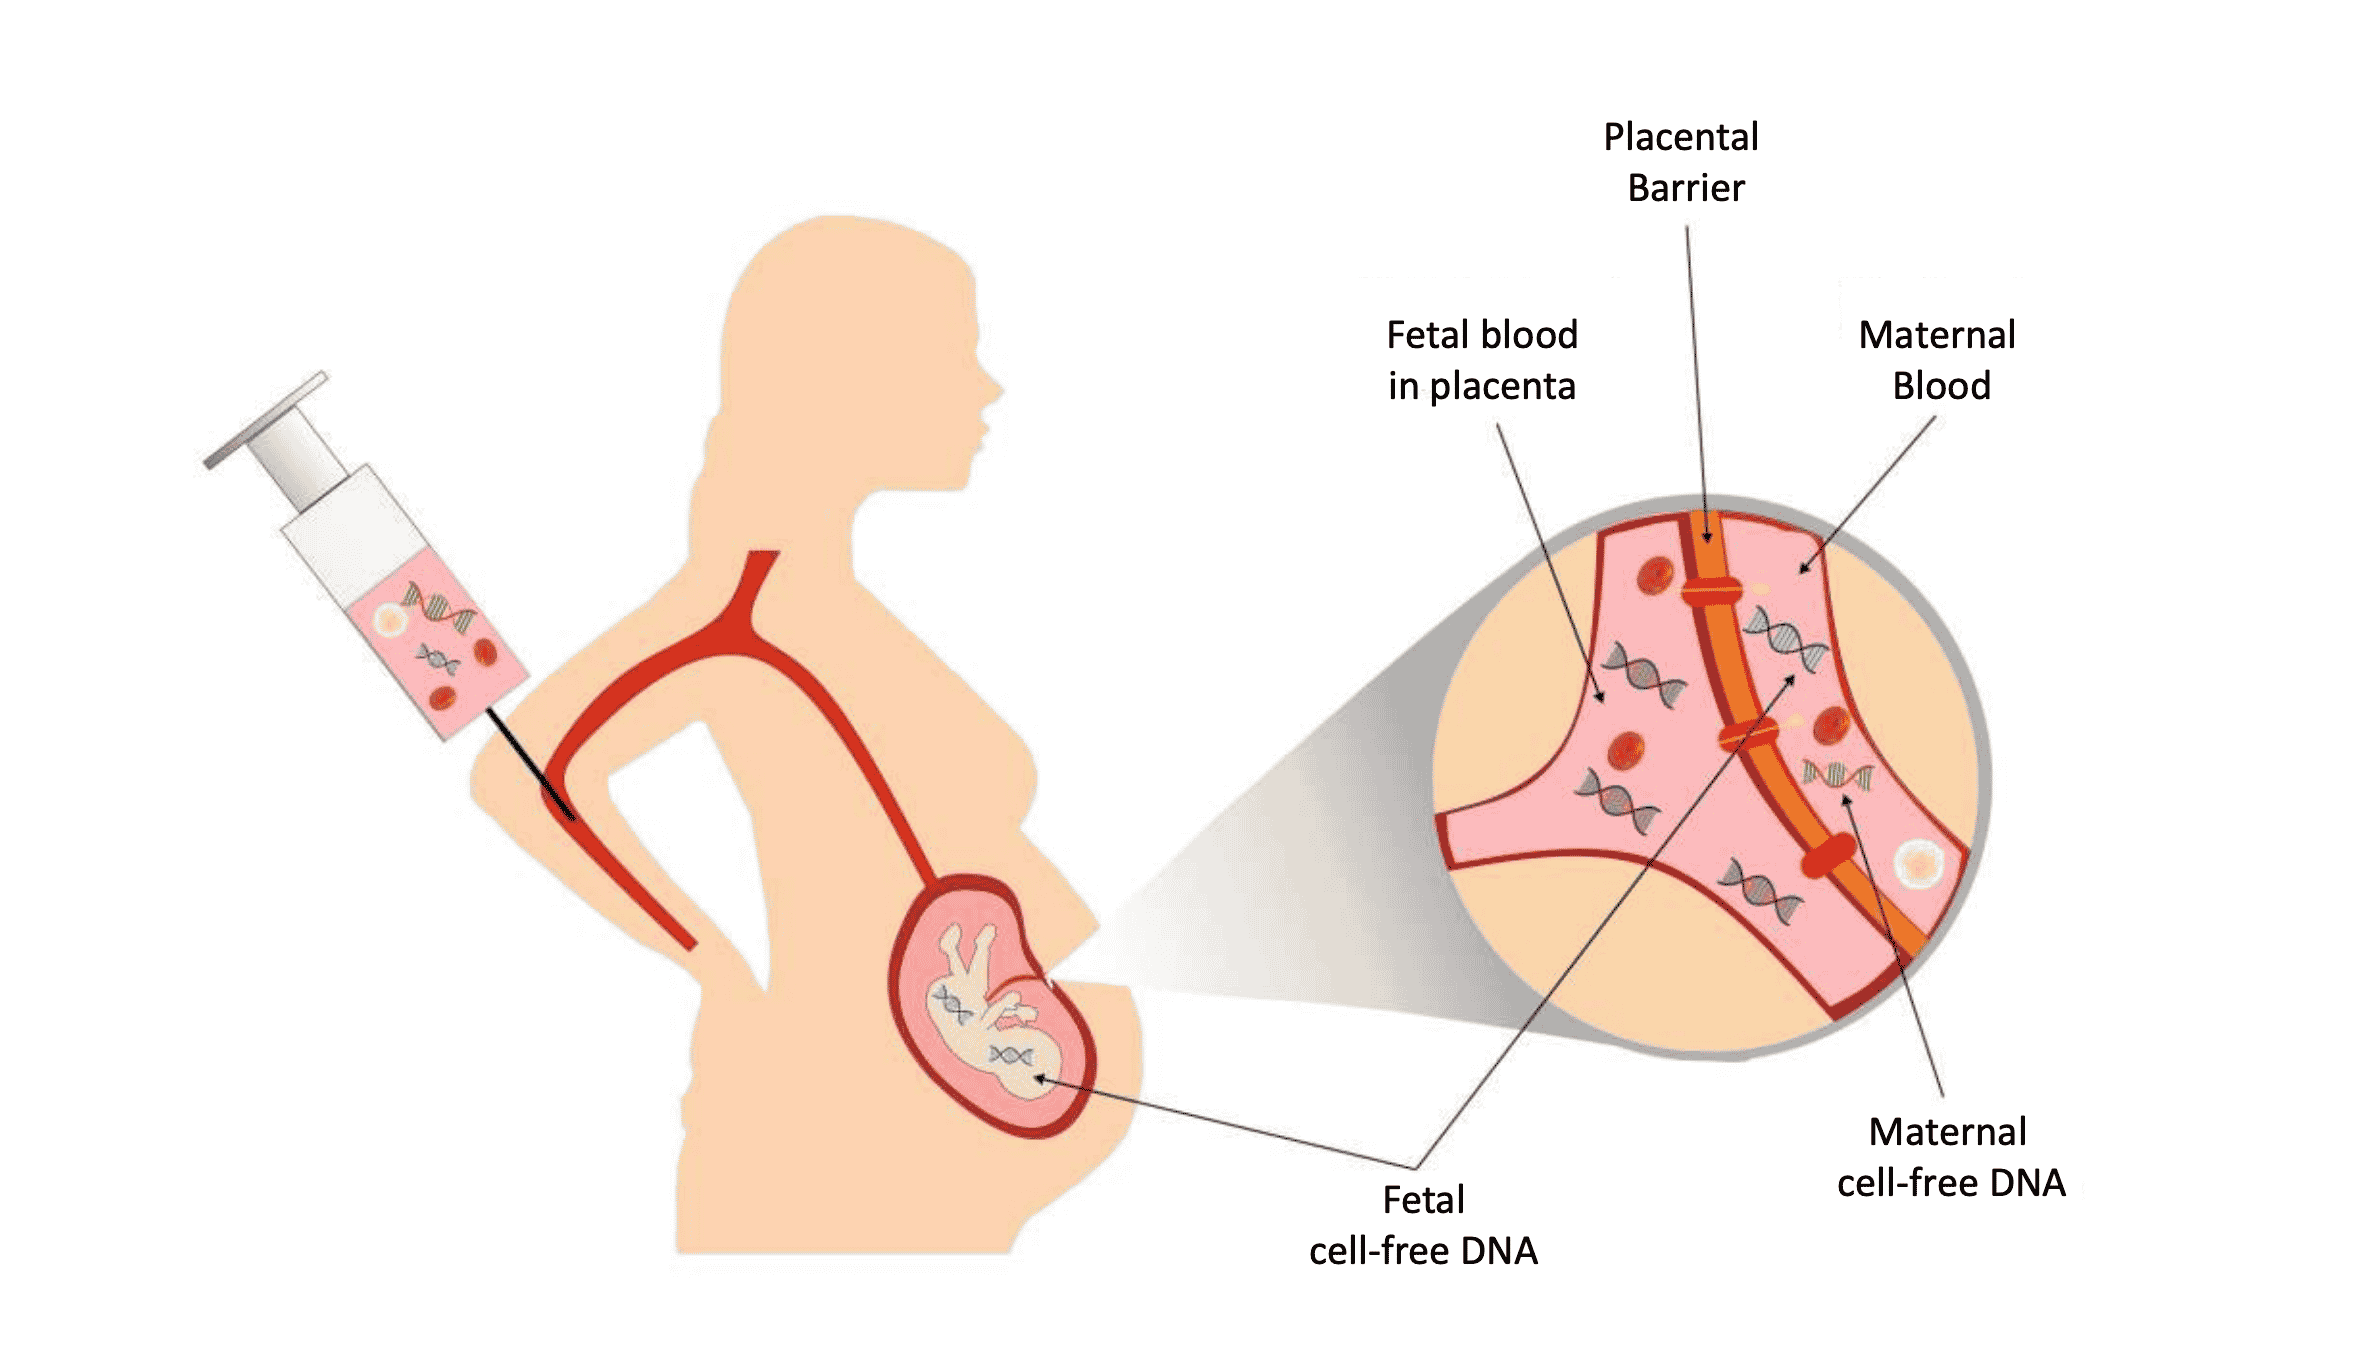 Image showing cross-section of a uterus showing fetal blood and cell-free DNA separated from maternal blood and cell-free DNA by placental barrier.